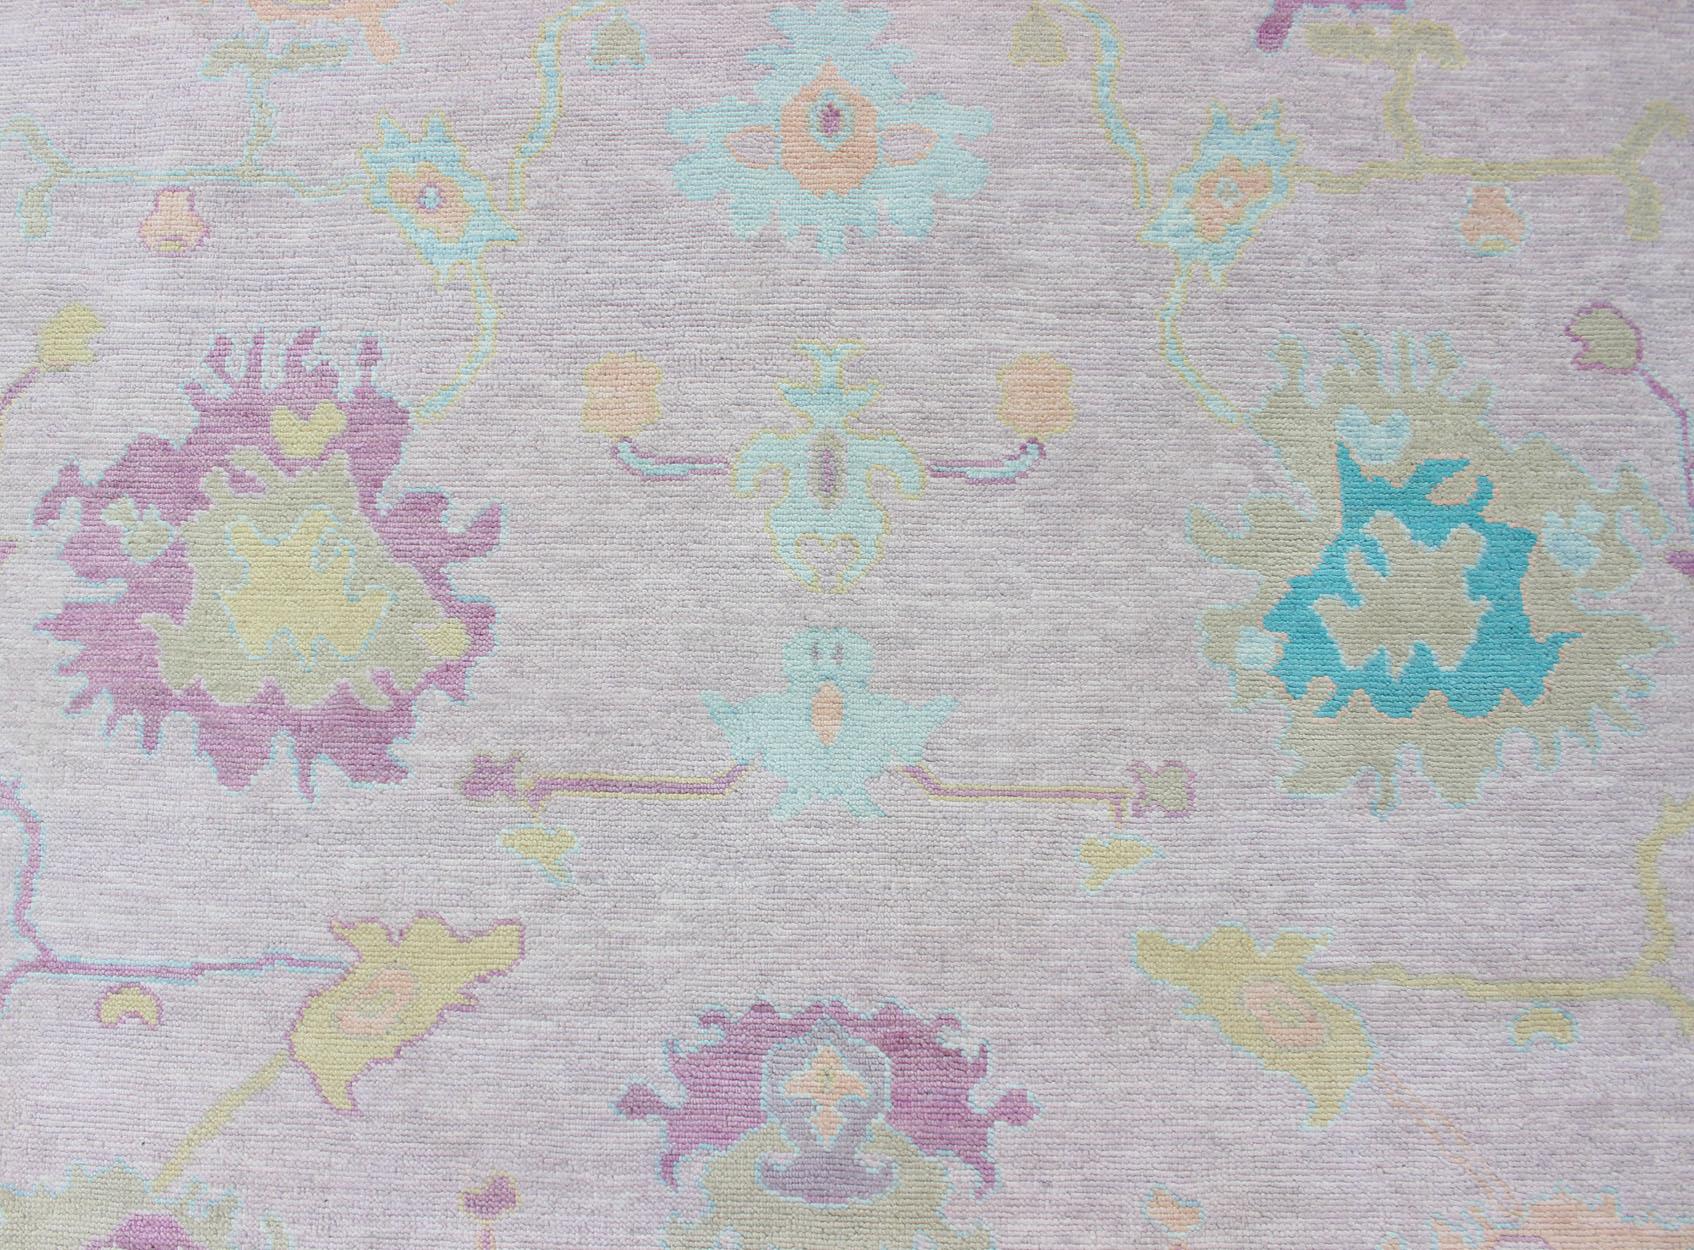 Modern Oushak Designed Rug In Wool With Light Pink and A Ice Blue Border by Keivan Woven Arts.
Measures 9'5 x 12'1
This fantastically whimsical piece was hand knotted in India during the 2010's. This Oushak features a classic floral design, but with